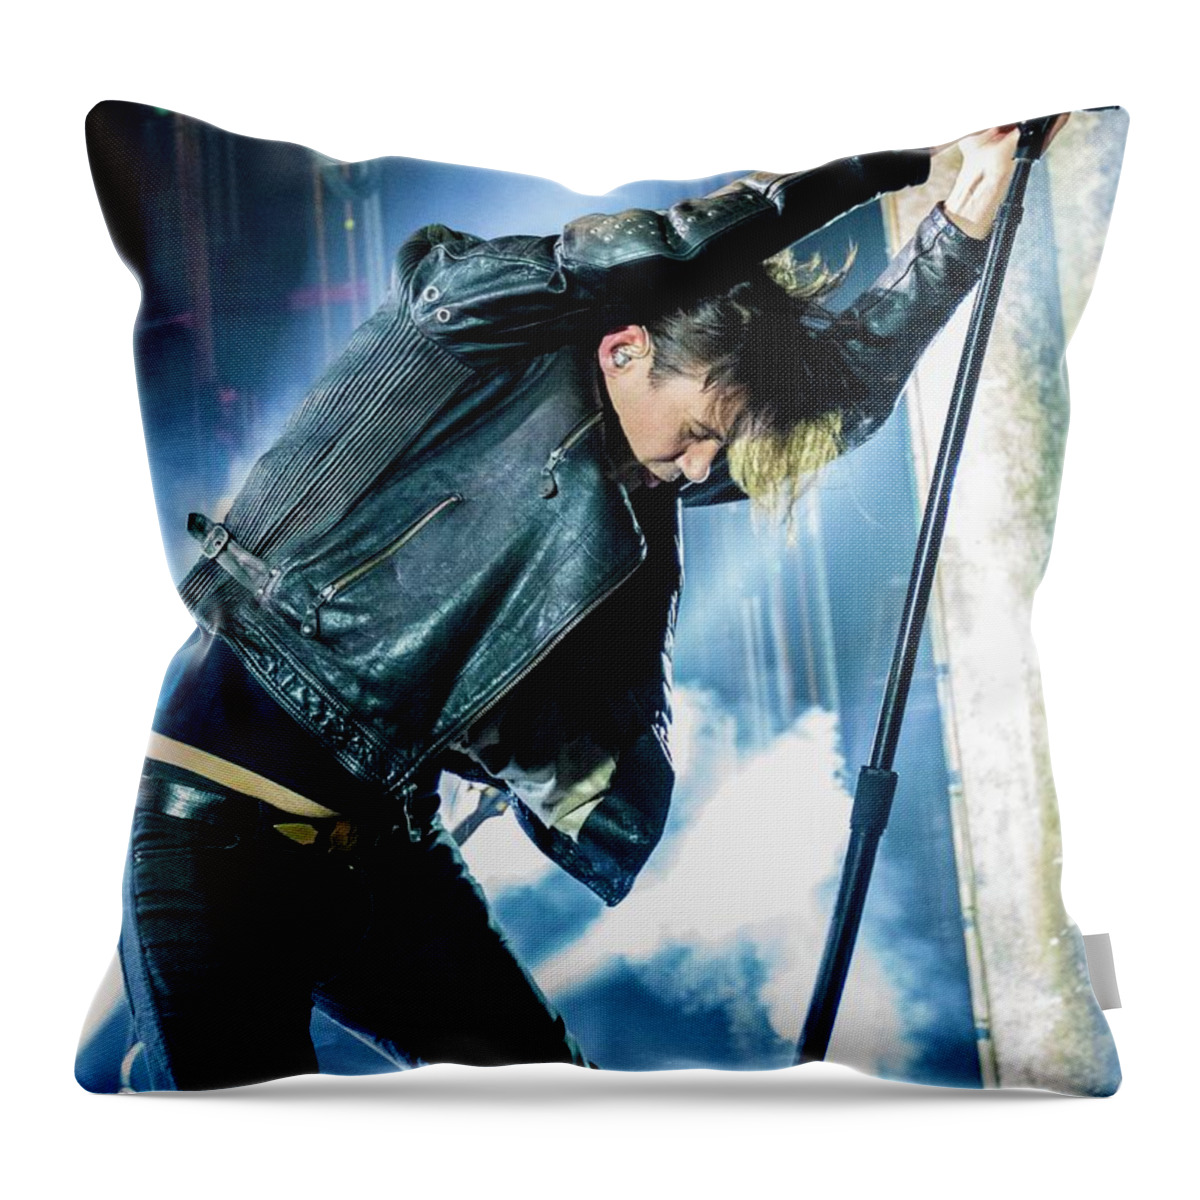 Band Throw Pillow featuring the photograph Grinspoon @ Tivoli 2017 by Leon Jones